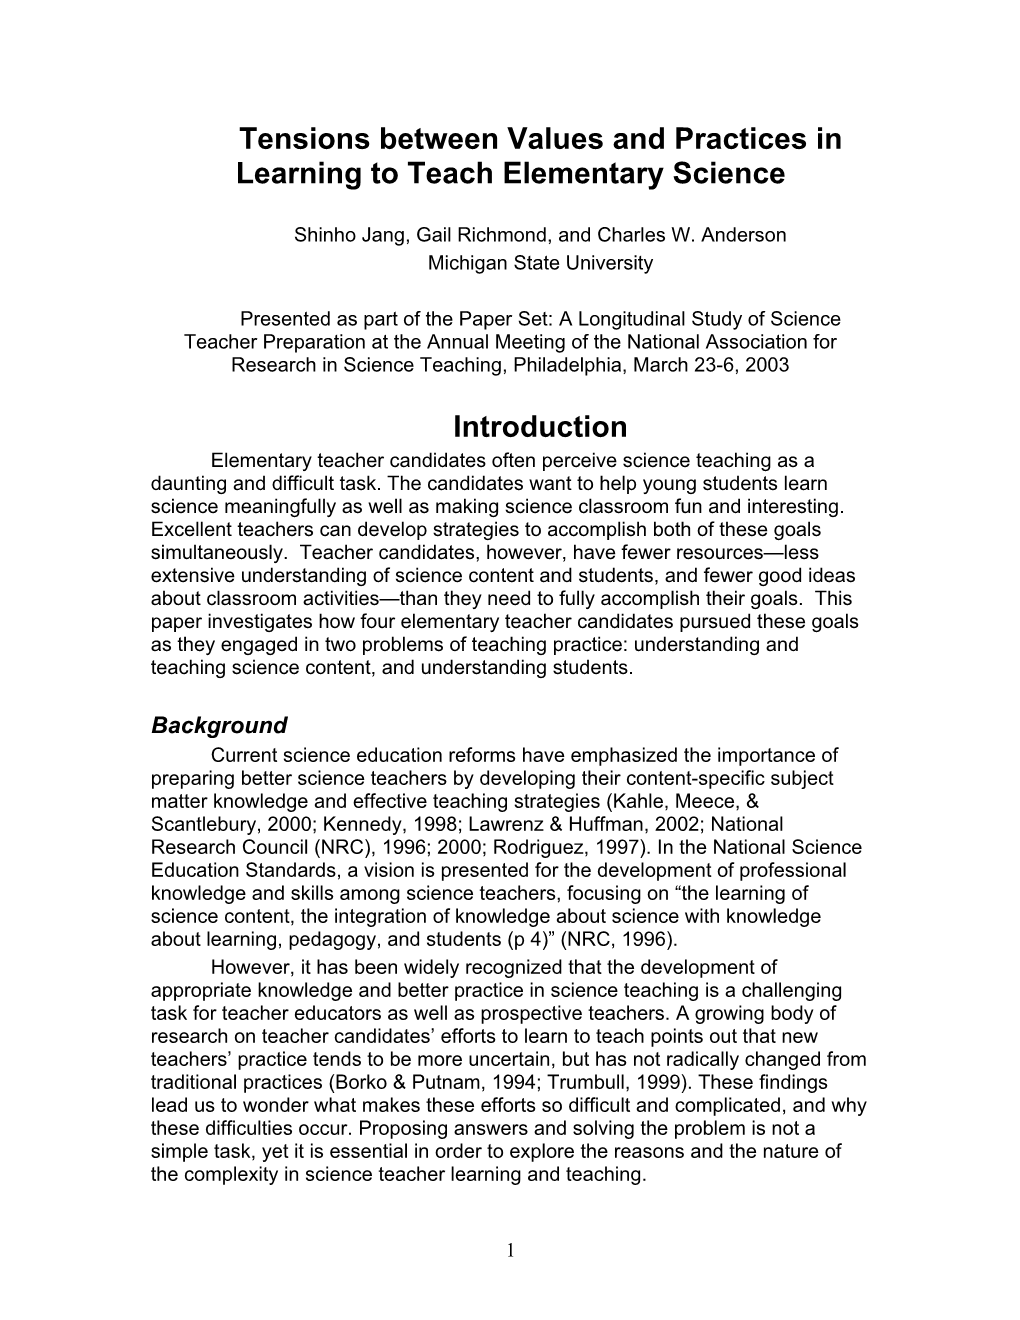 Tensions Between Values and Practices in Learning to Teach Elementary Science